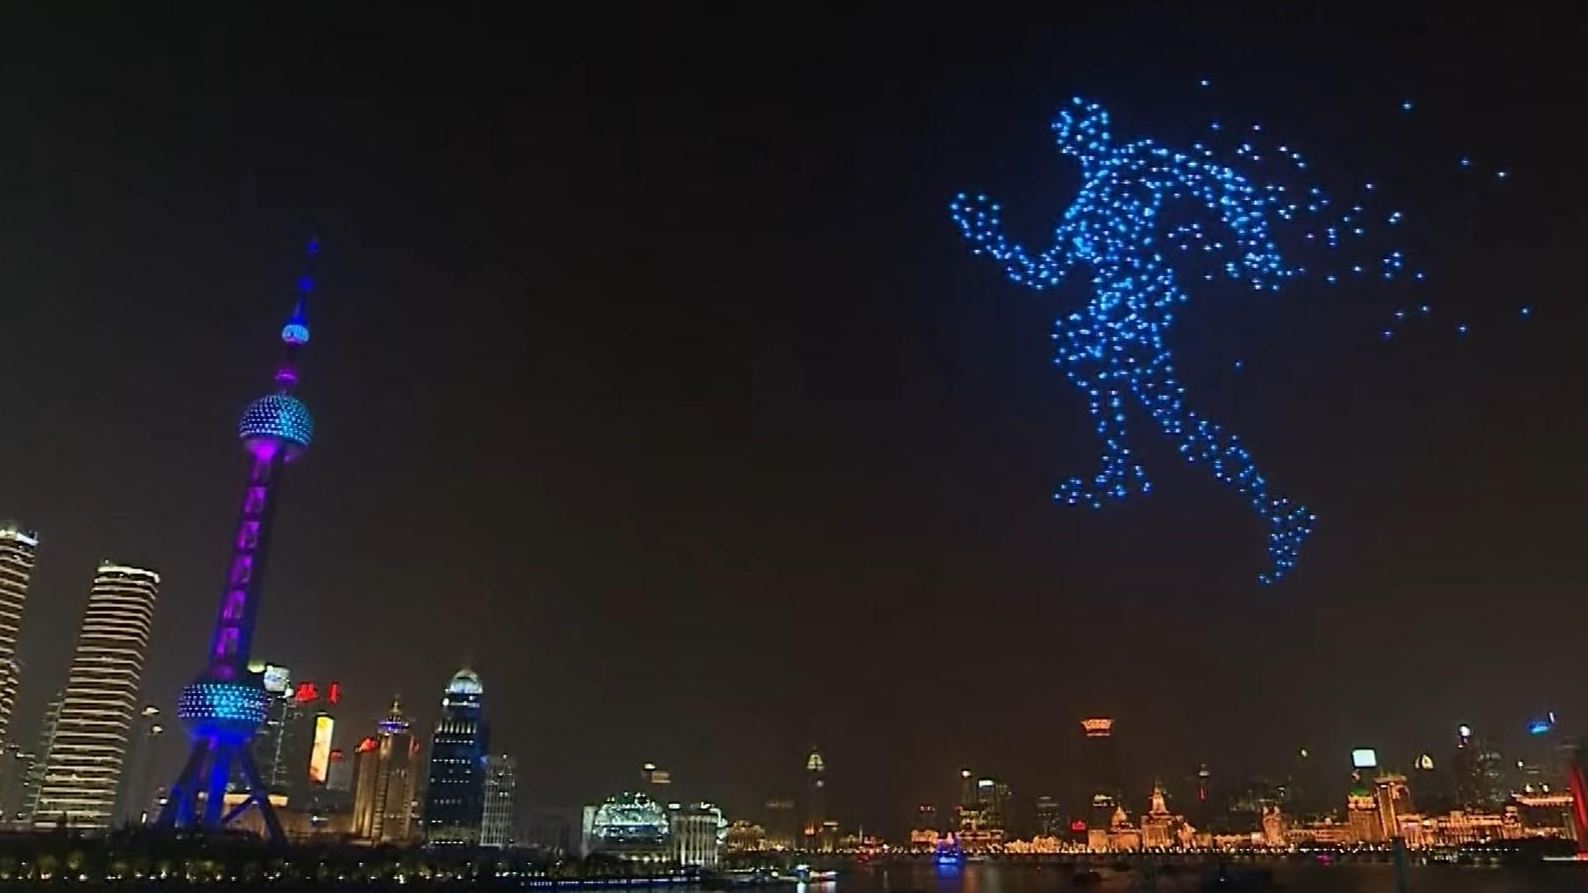 Drone light shows take flight, replacing fireworks -